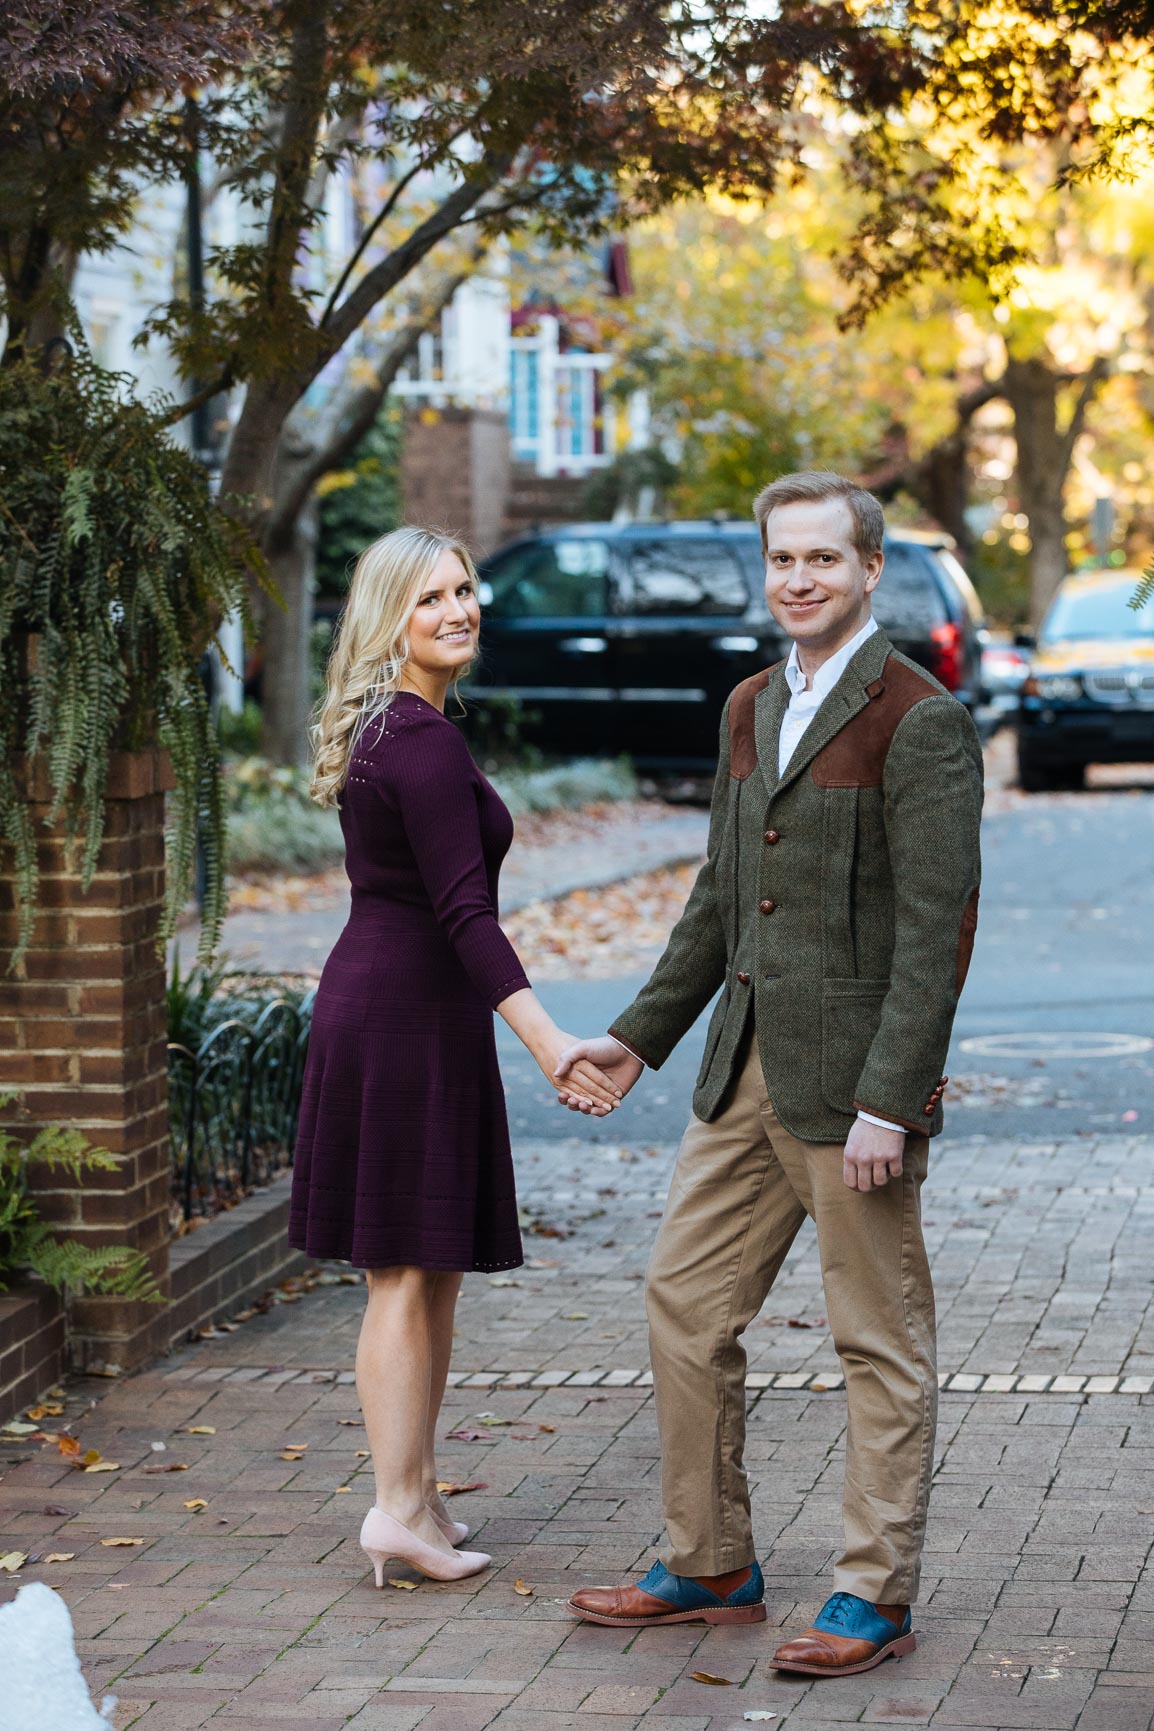 Uptown Charlotte fall engagement session at fourth ward historic neighborhood shot by nhieu tang photography | nhieutang.com